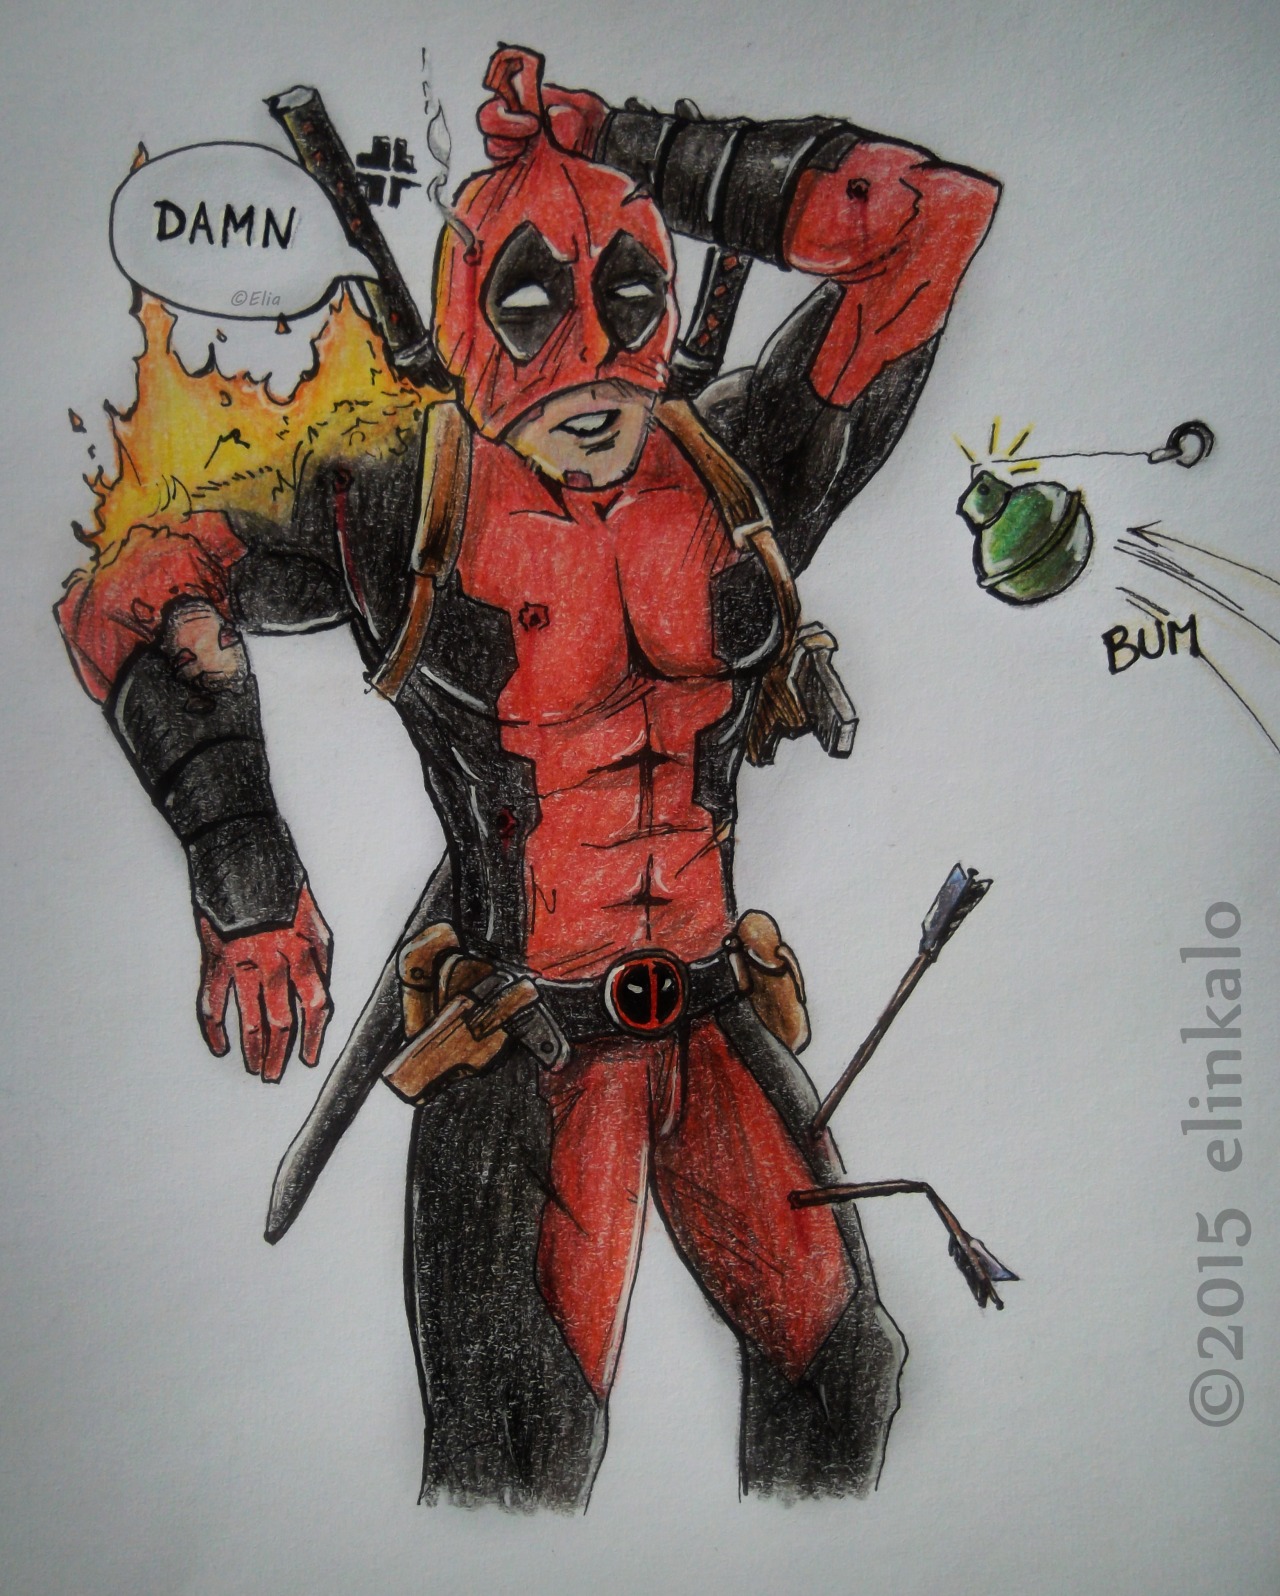 Marvel Heroes in Peril — elinkalo: Really bad day. Poor Deadpool :D